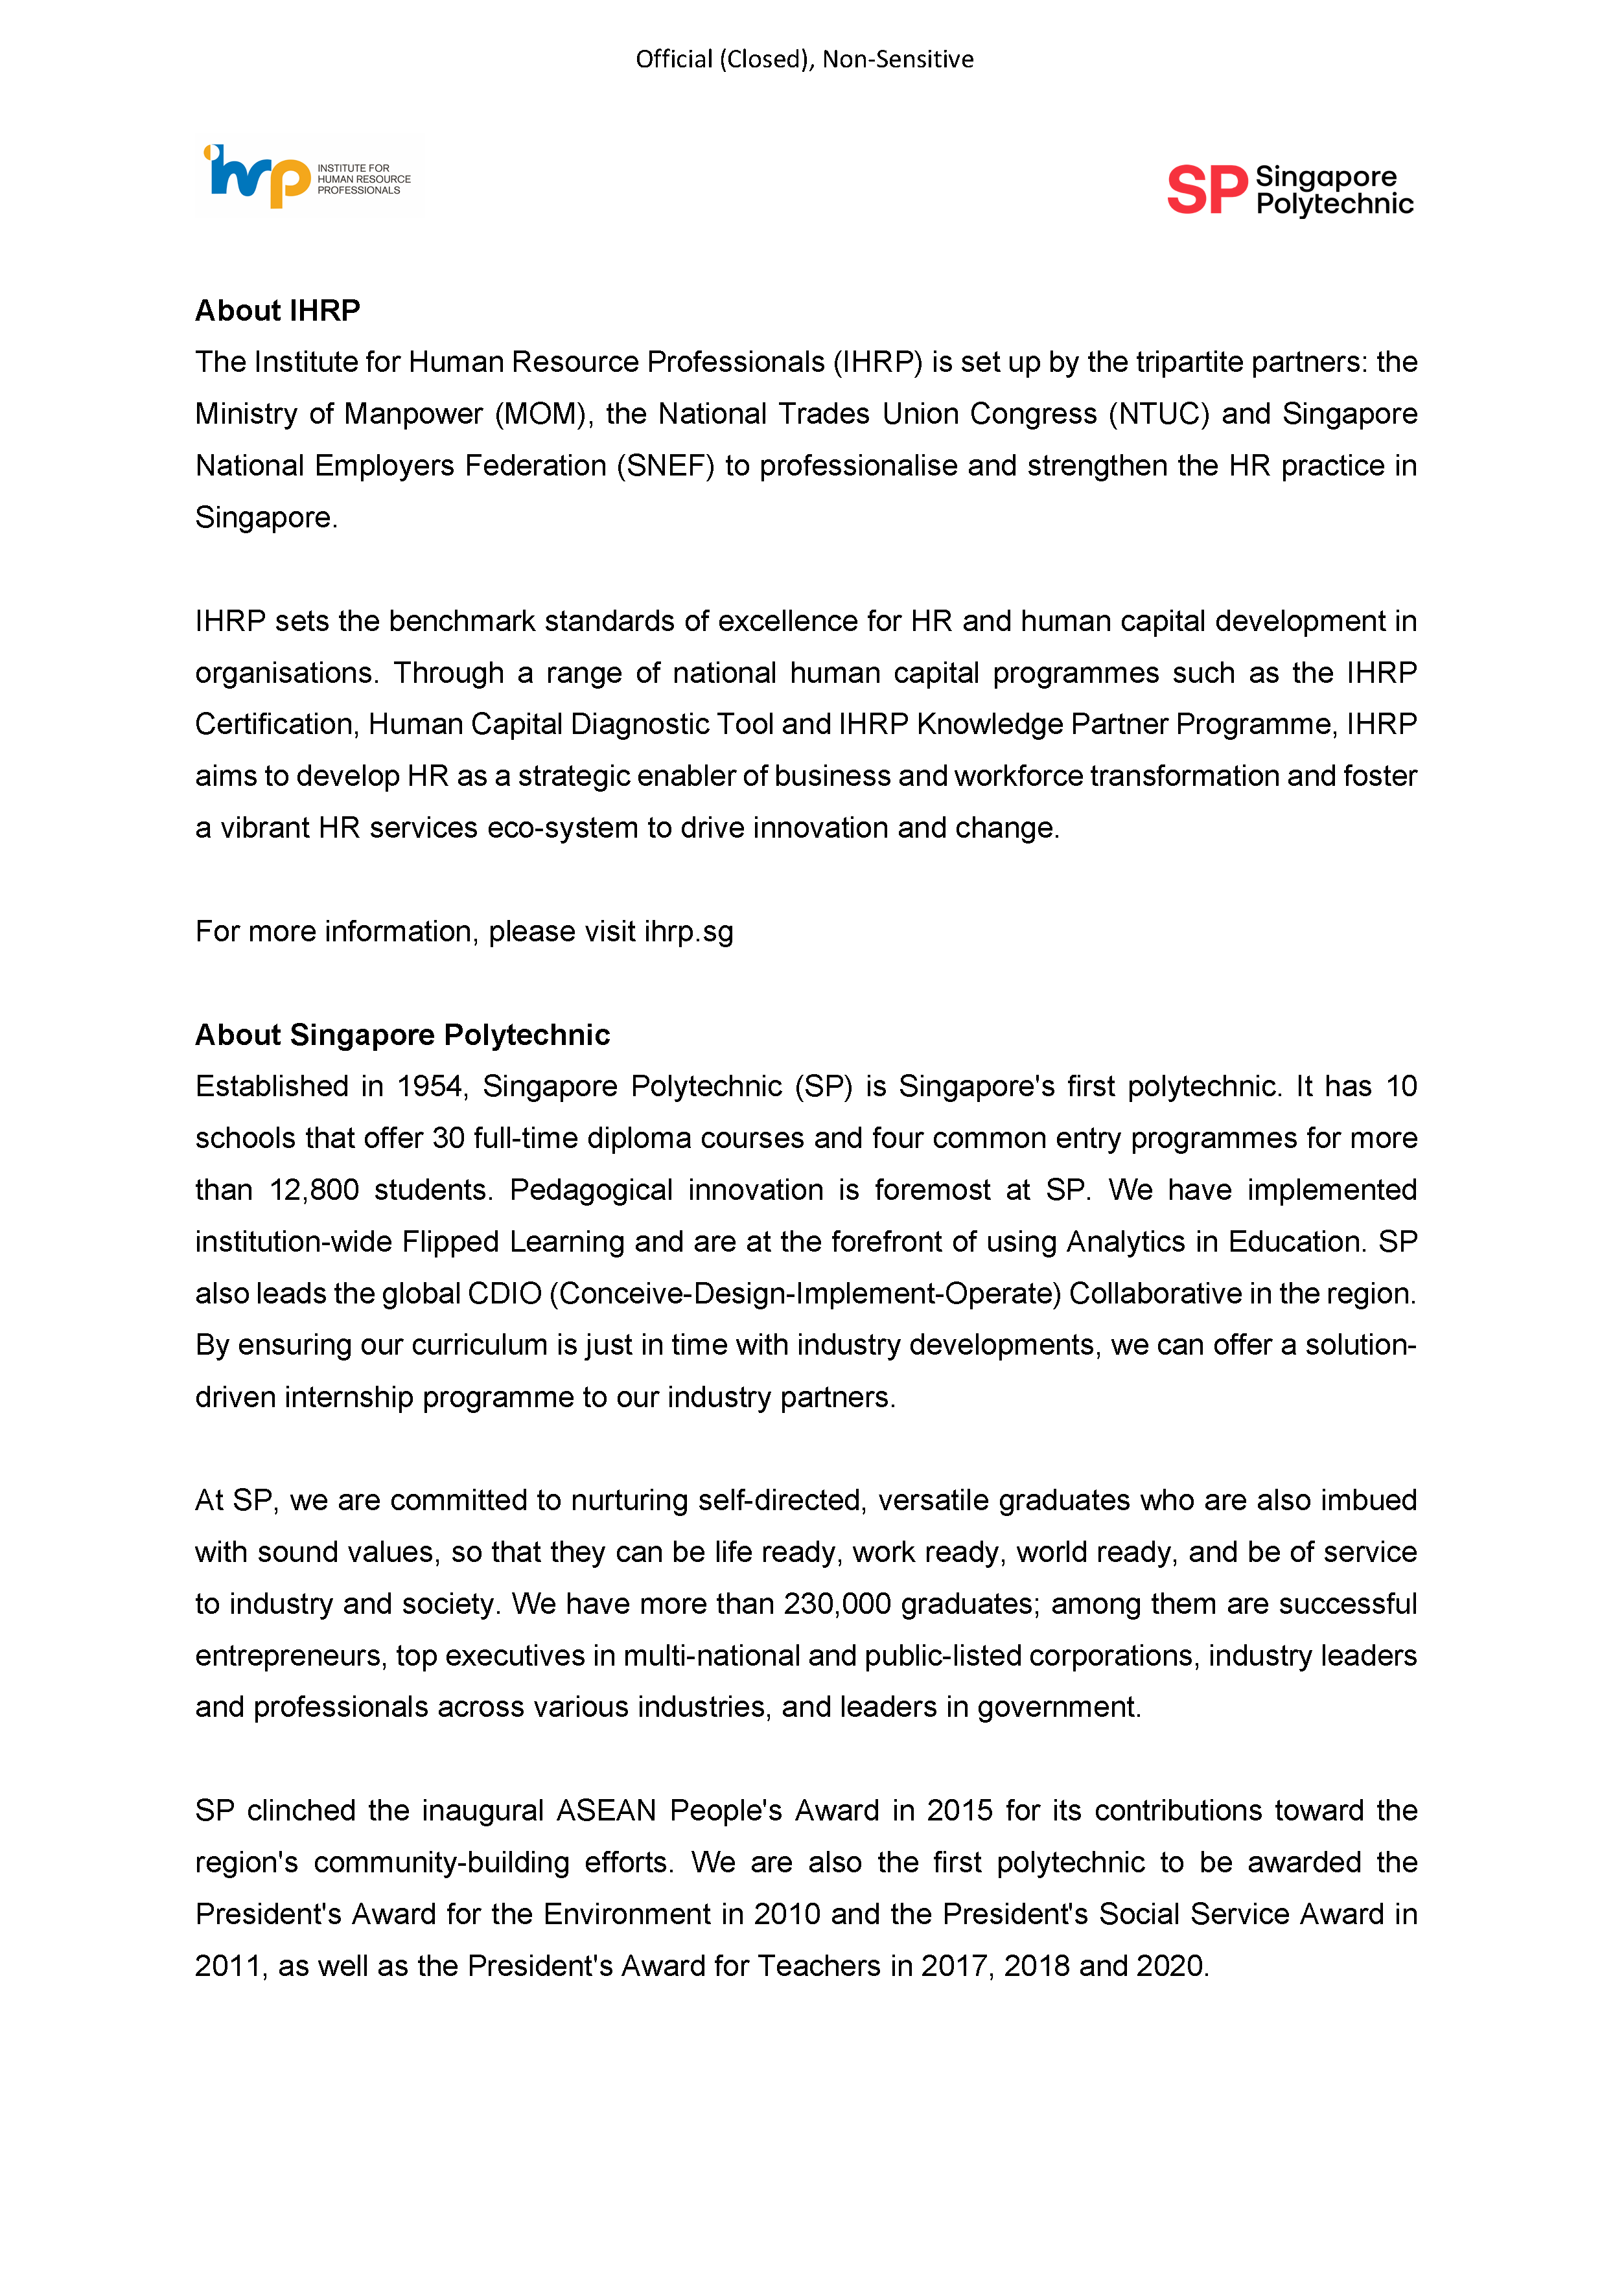 Press Release - Institute for Human Resource Professionals and Singapore Polytechnic launch a collaborative Human Resource Learning Journey_Page_3